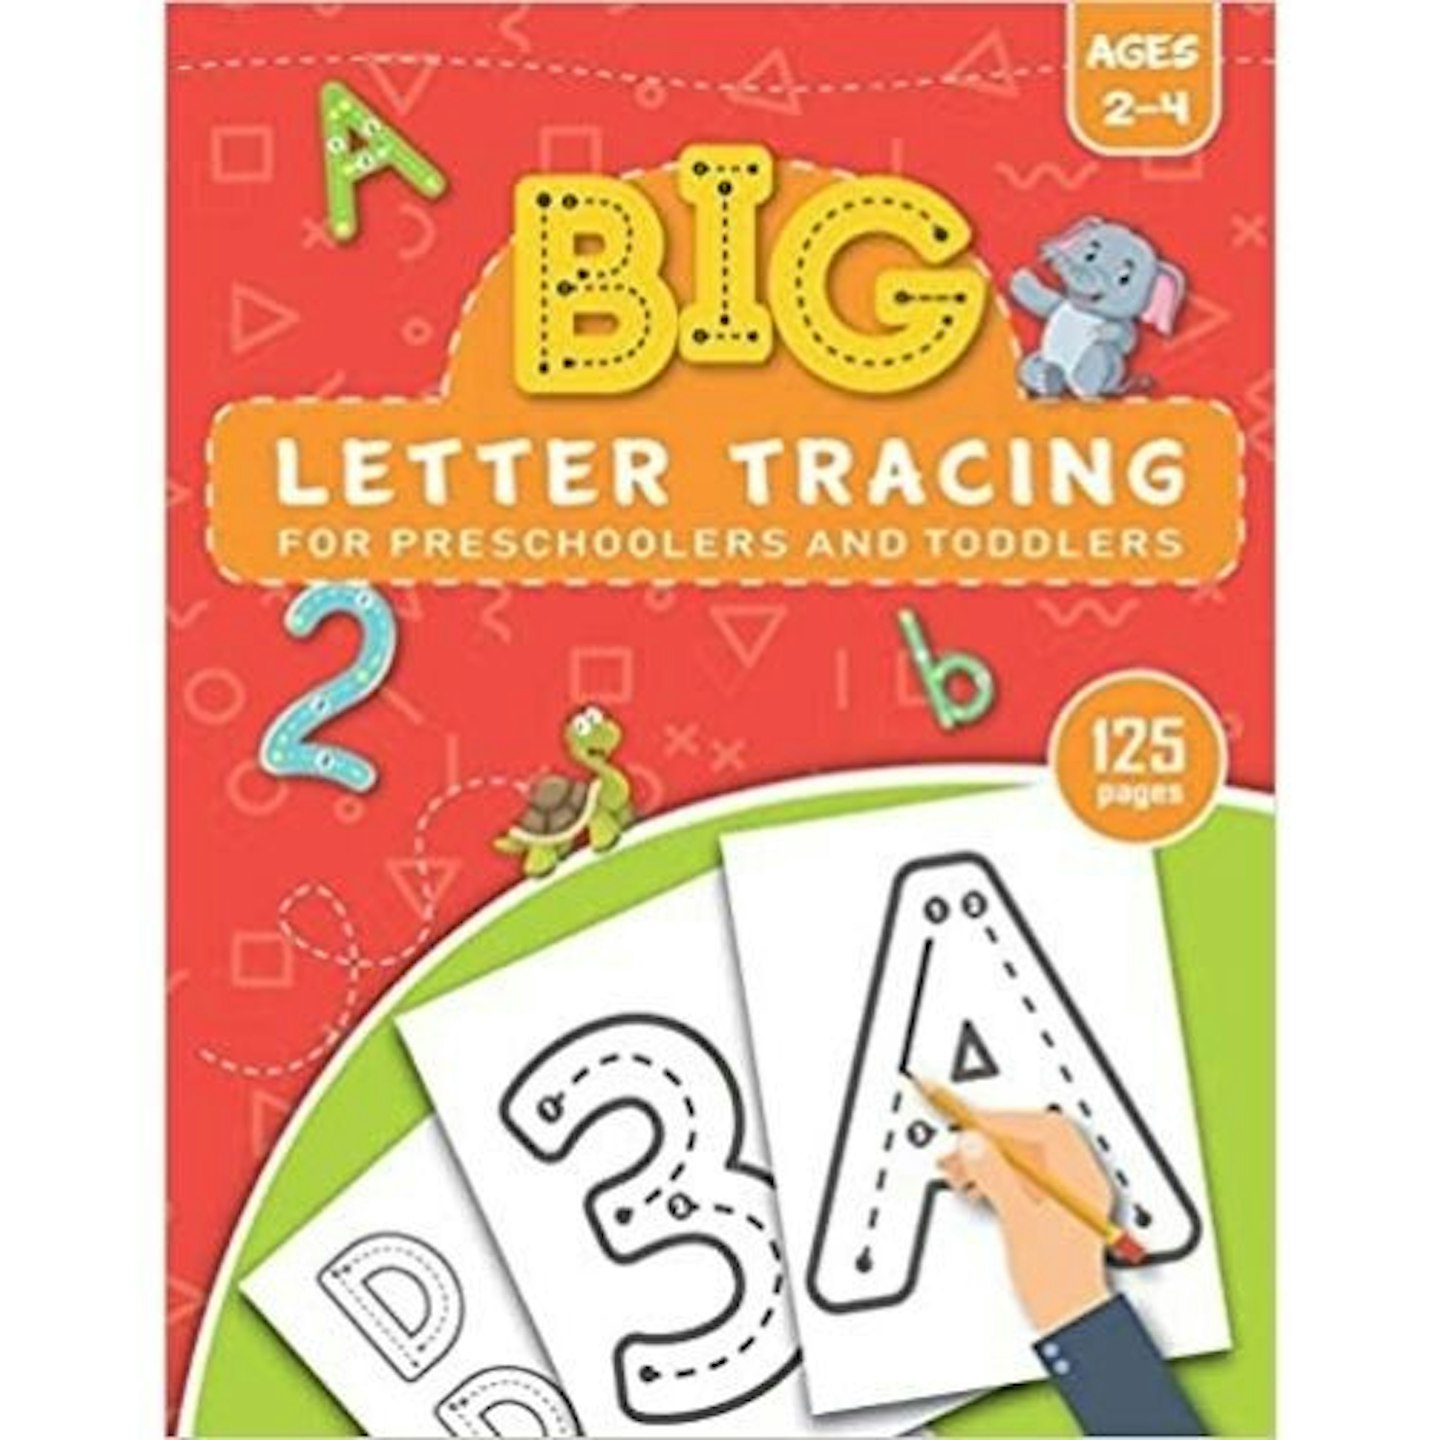 Big Letter Tracing